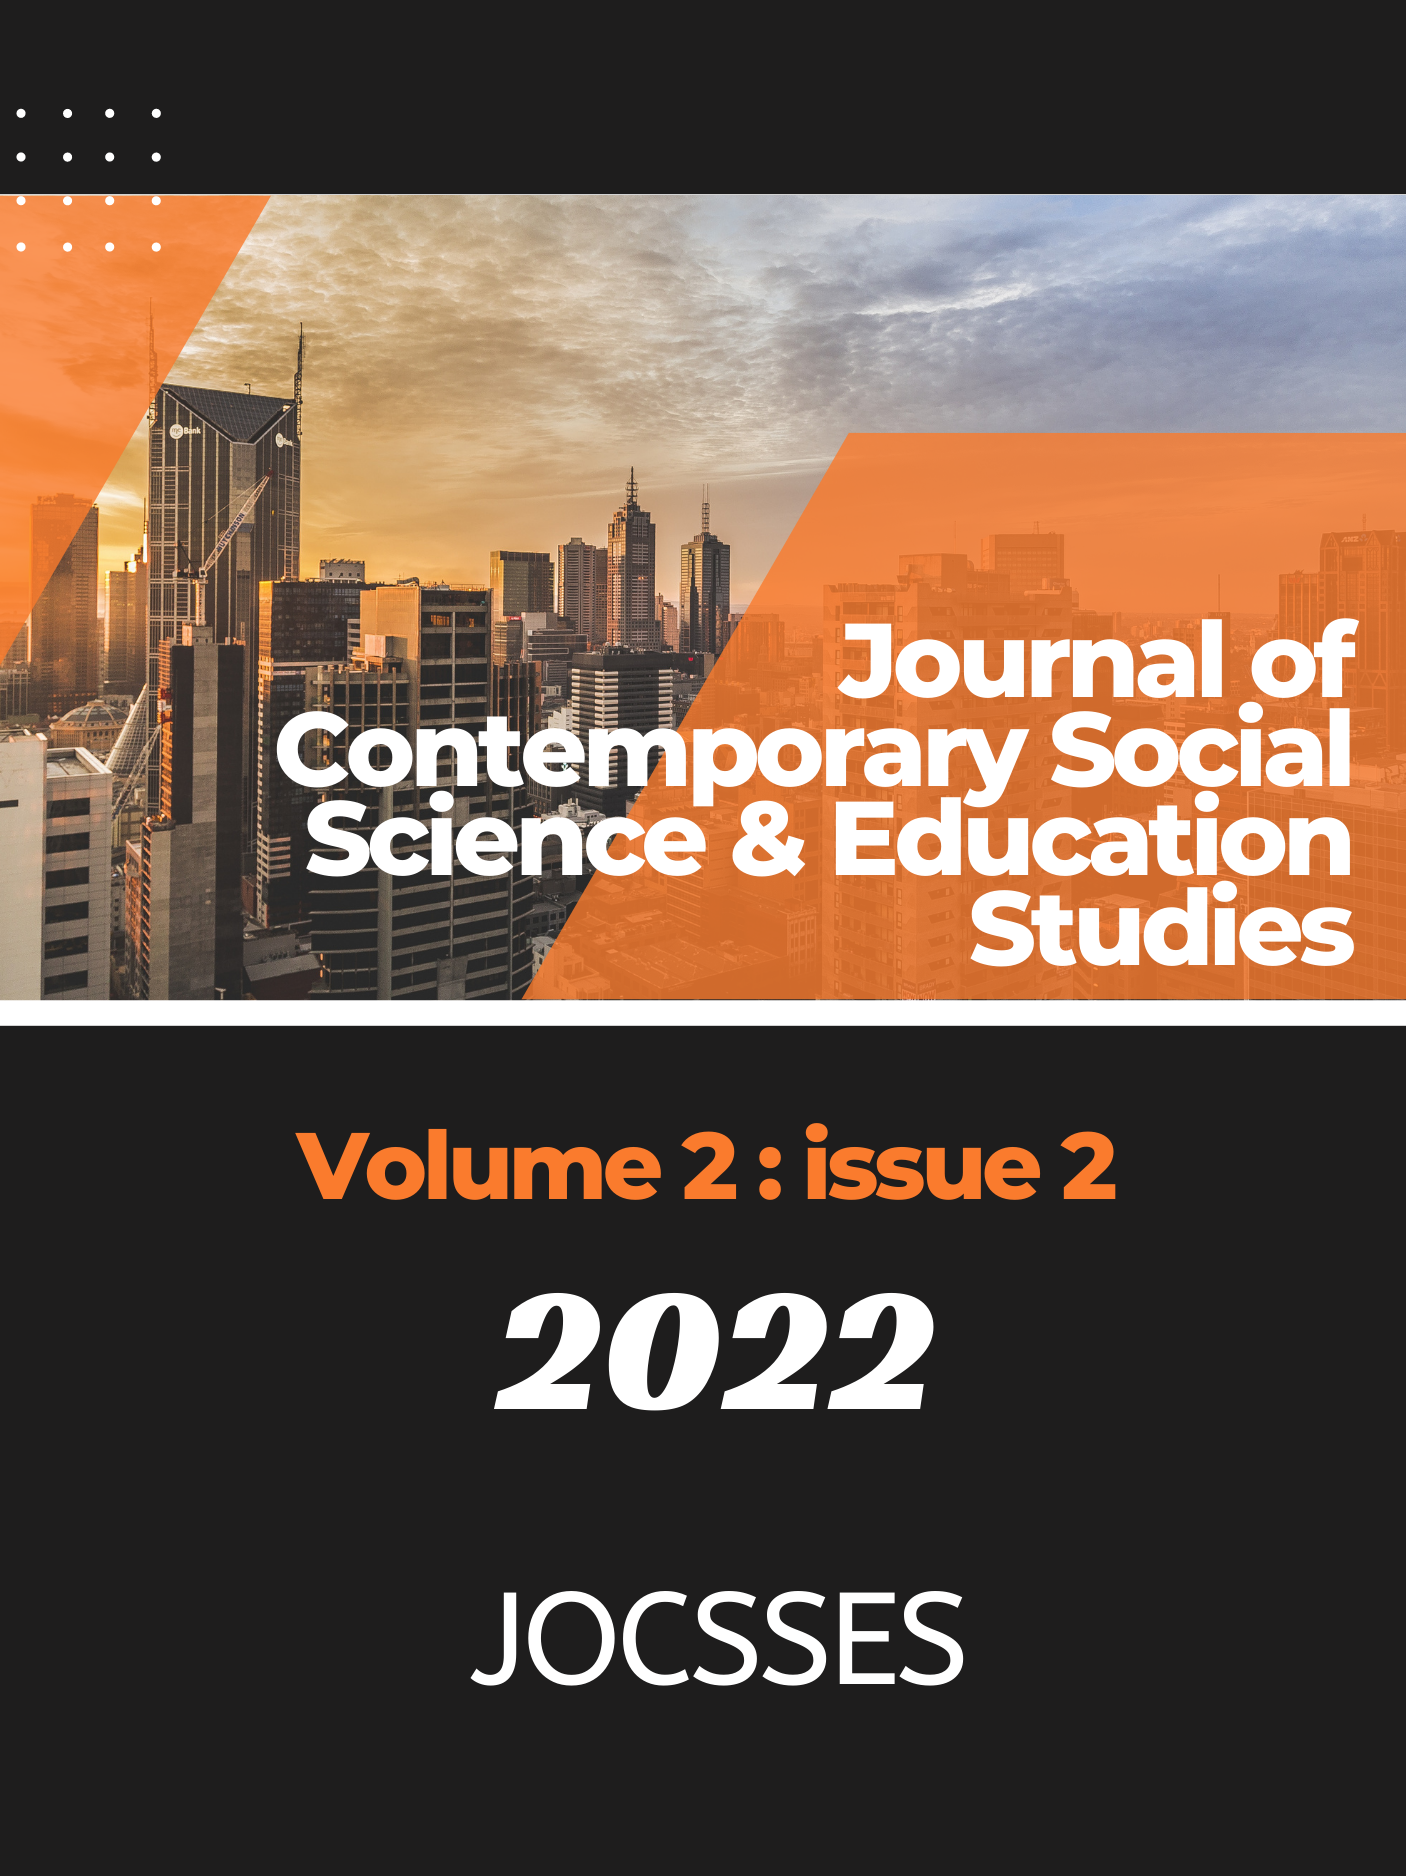 					View Vol. 2 No. 2 (2022): Journal of Contemporary Social Science & Education Studies
				